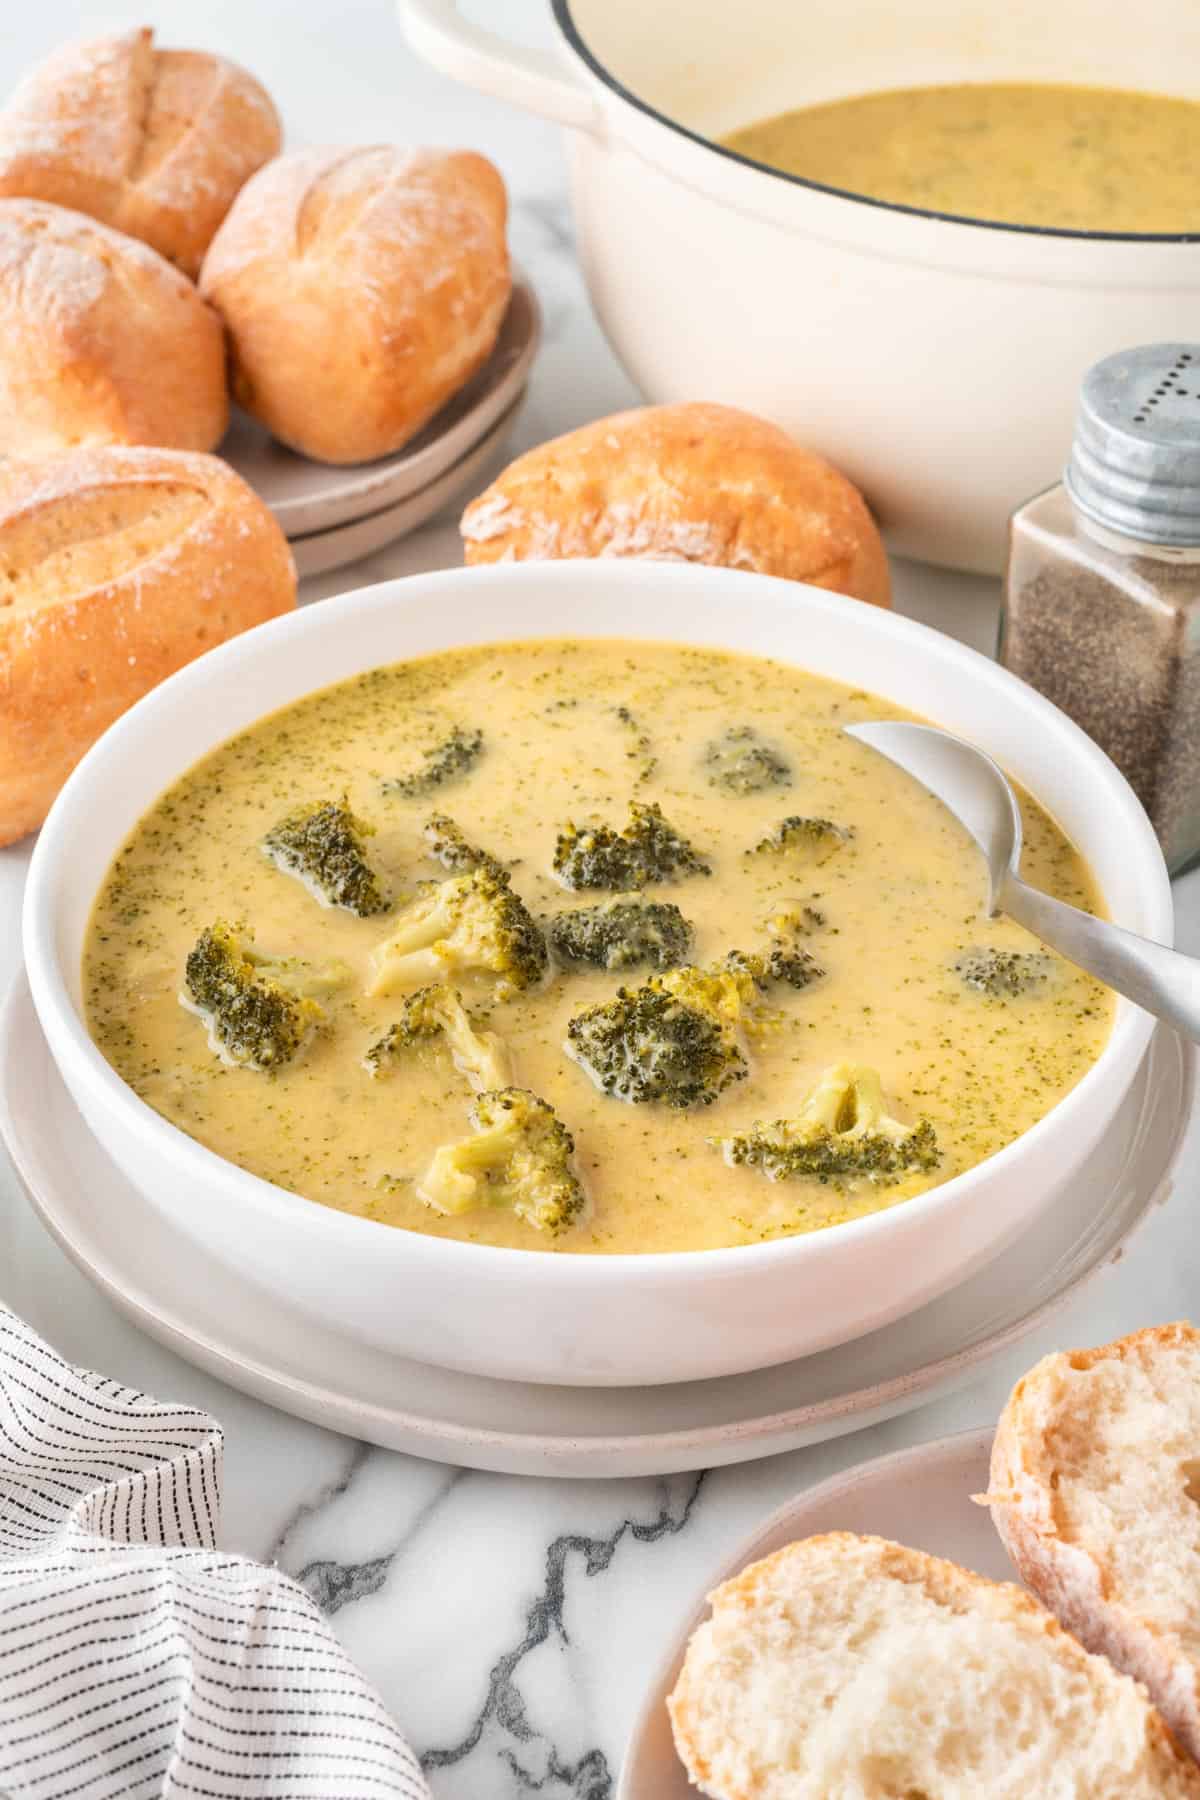 A photo of a bowl of cheesy broccoli soup with a spoon.